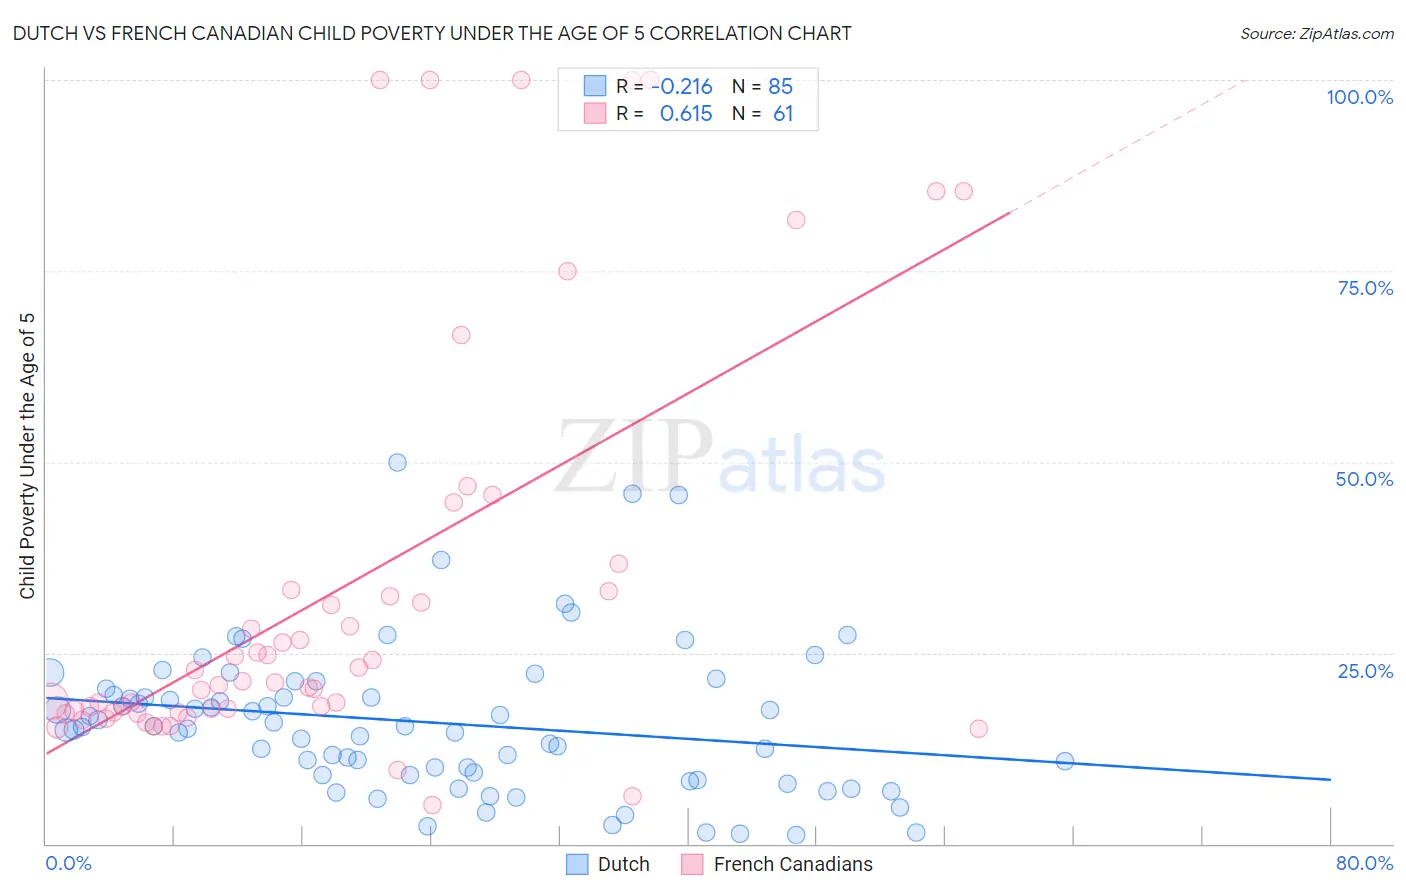 Dutch vs French Canadian Child Poverty Under the Age of 5